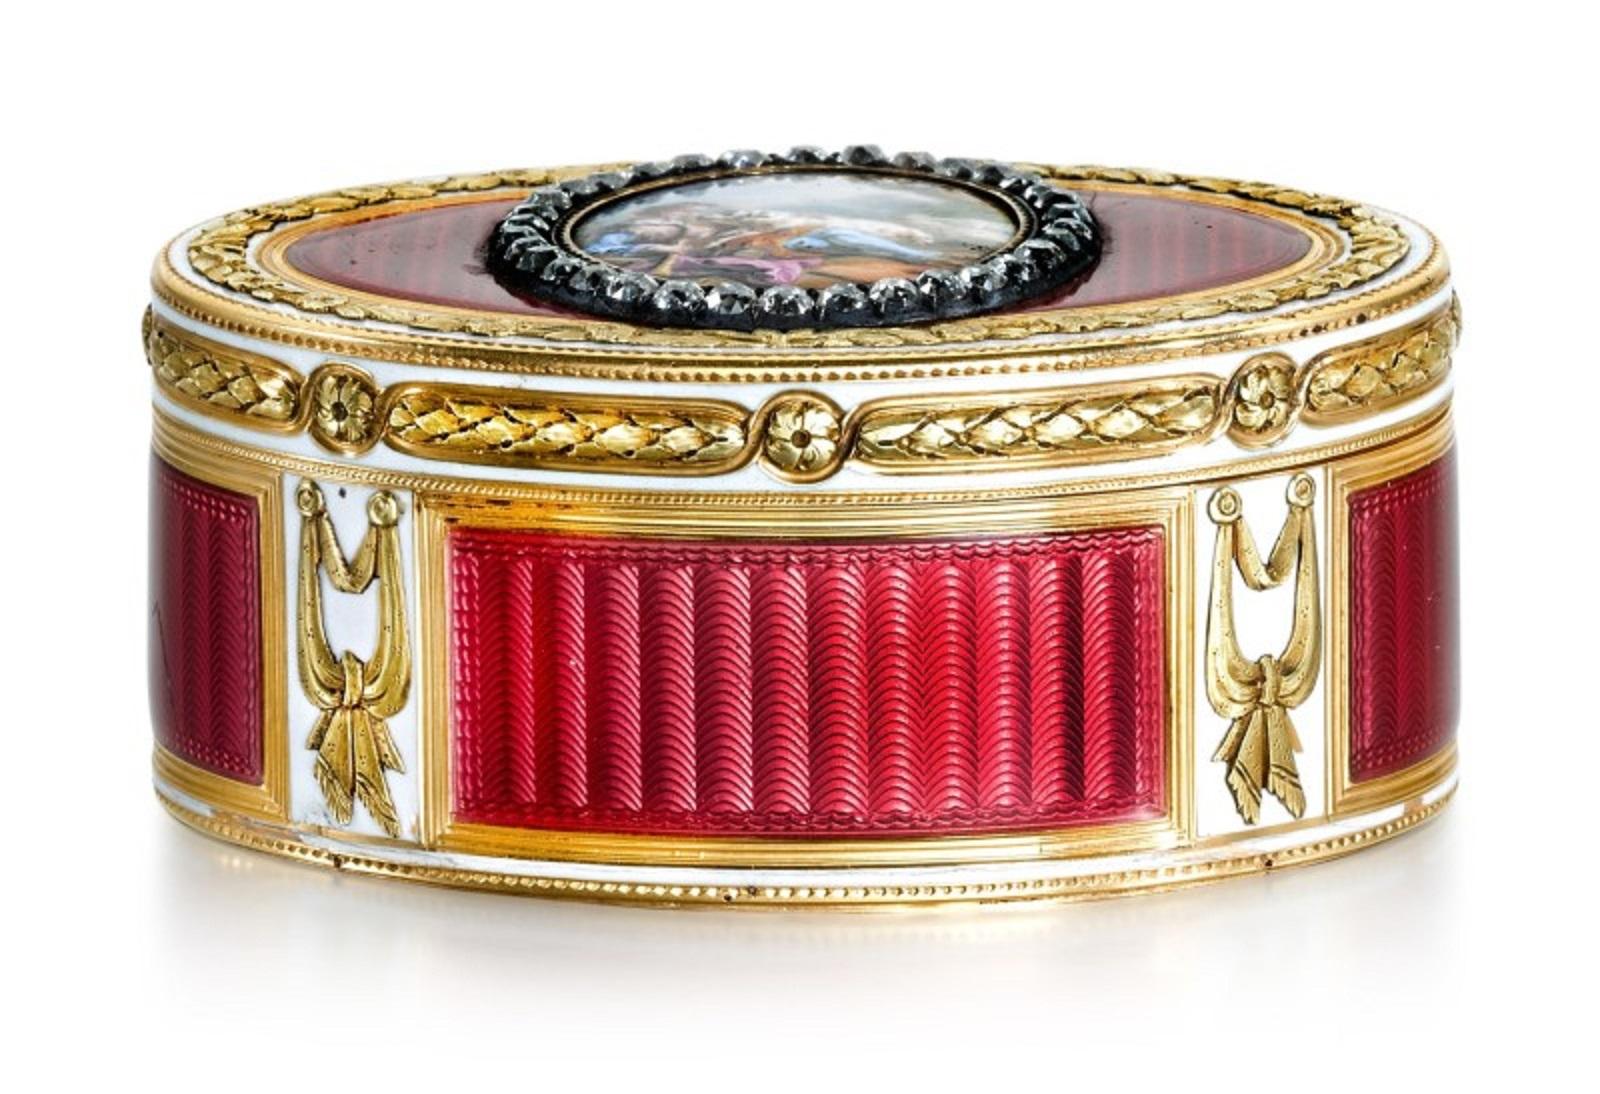 A jewelled two-colour gold and enamel snuff box, Charles Le Bastier

Paris, 1775, and later

oval, the lid later applied with an oval enamel plaque, representing a young shepherd embracing one of his flock, within a rose-cut diamond frame, the